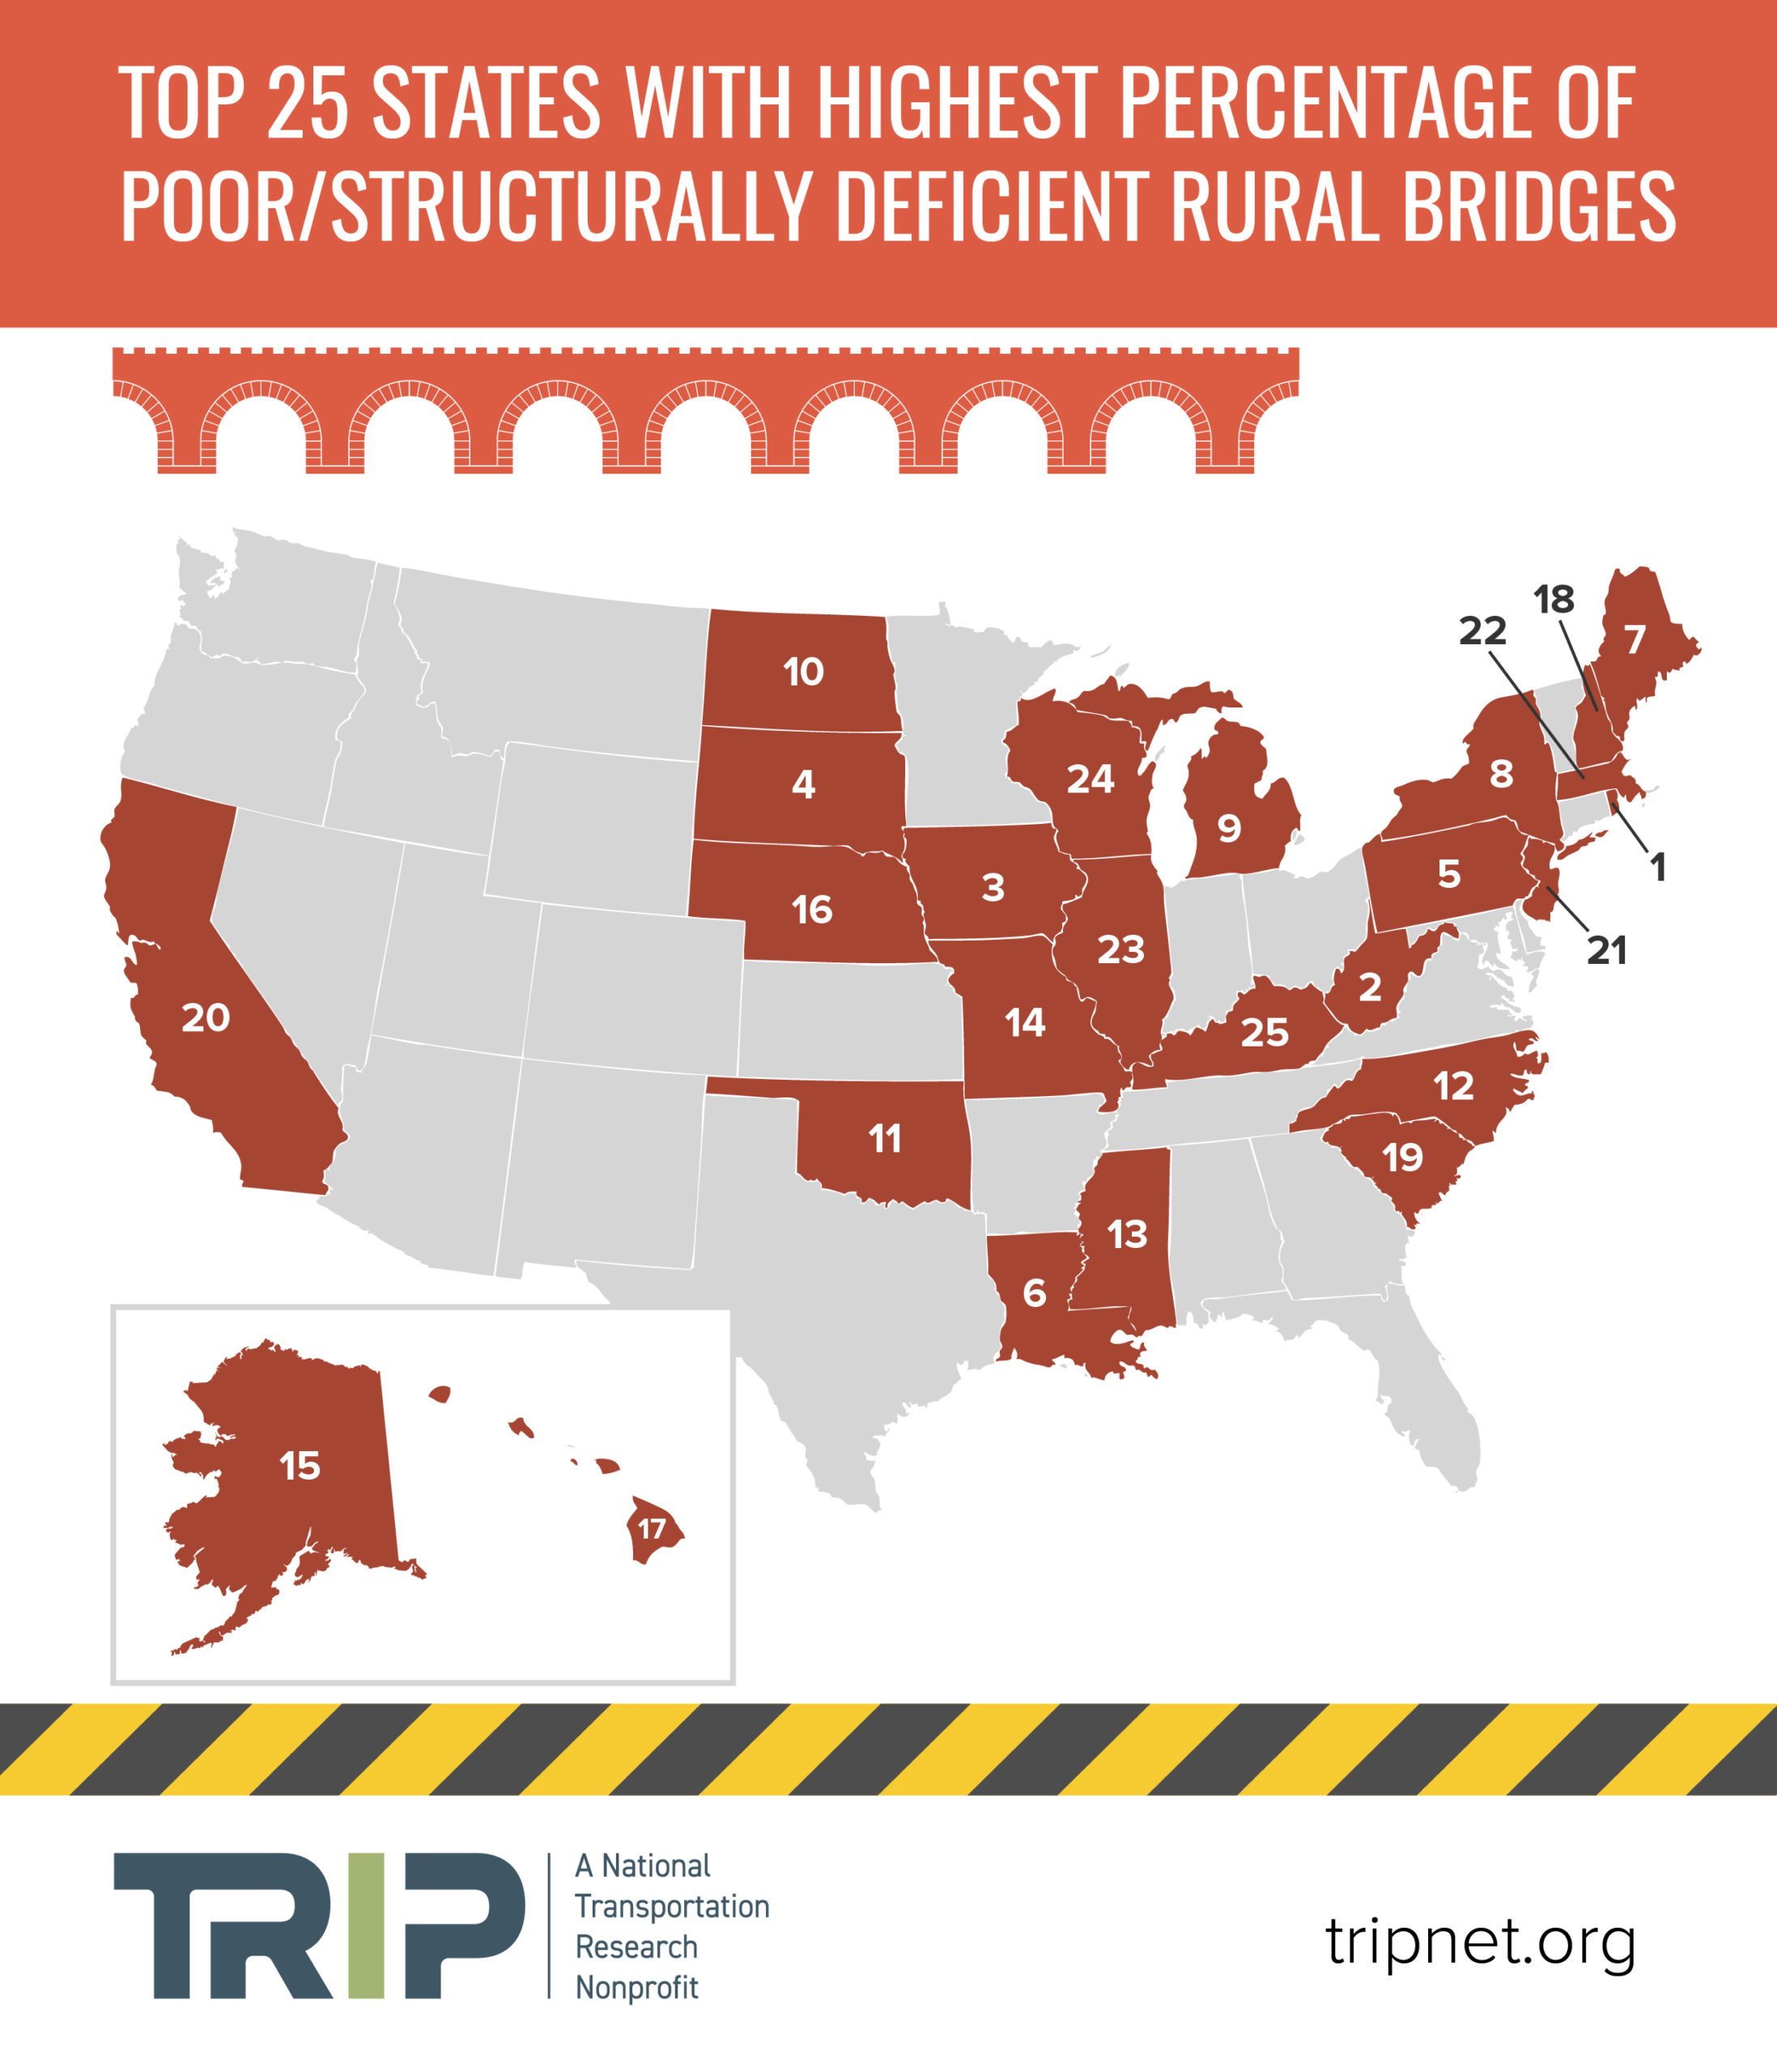 Rural Roads Report 2020: Top 25 States with Highest Percentage of Poor/Structurally Deficient Rural Bridges Infographic